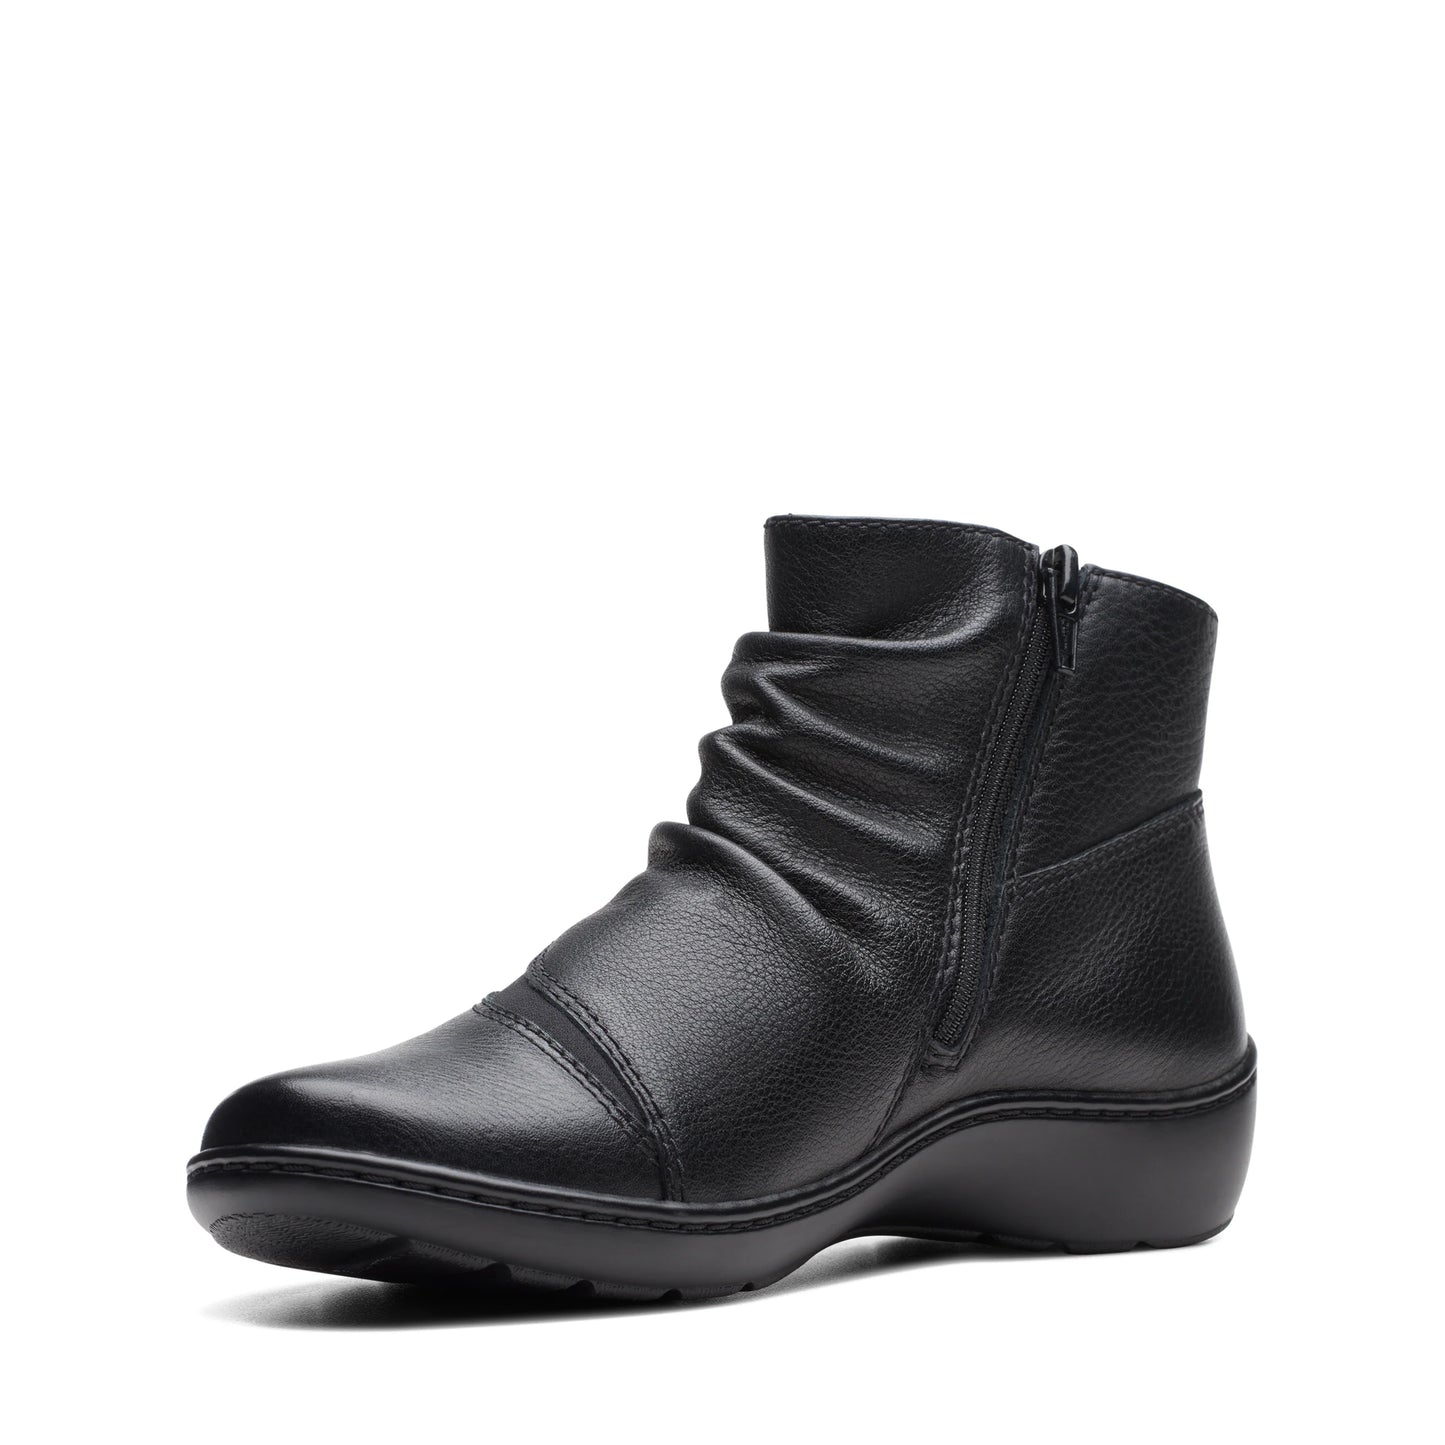 CLARKS | BOTINES MUJER | CORA DERBY BLACK LEATHER | NEGRO